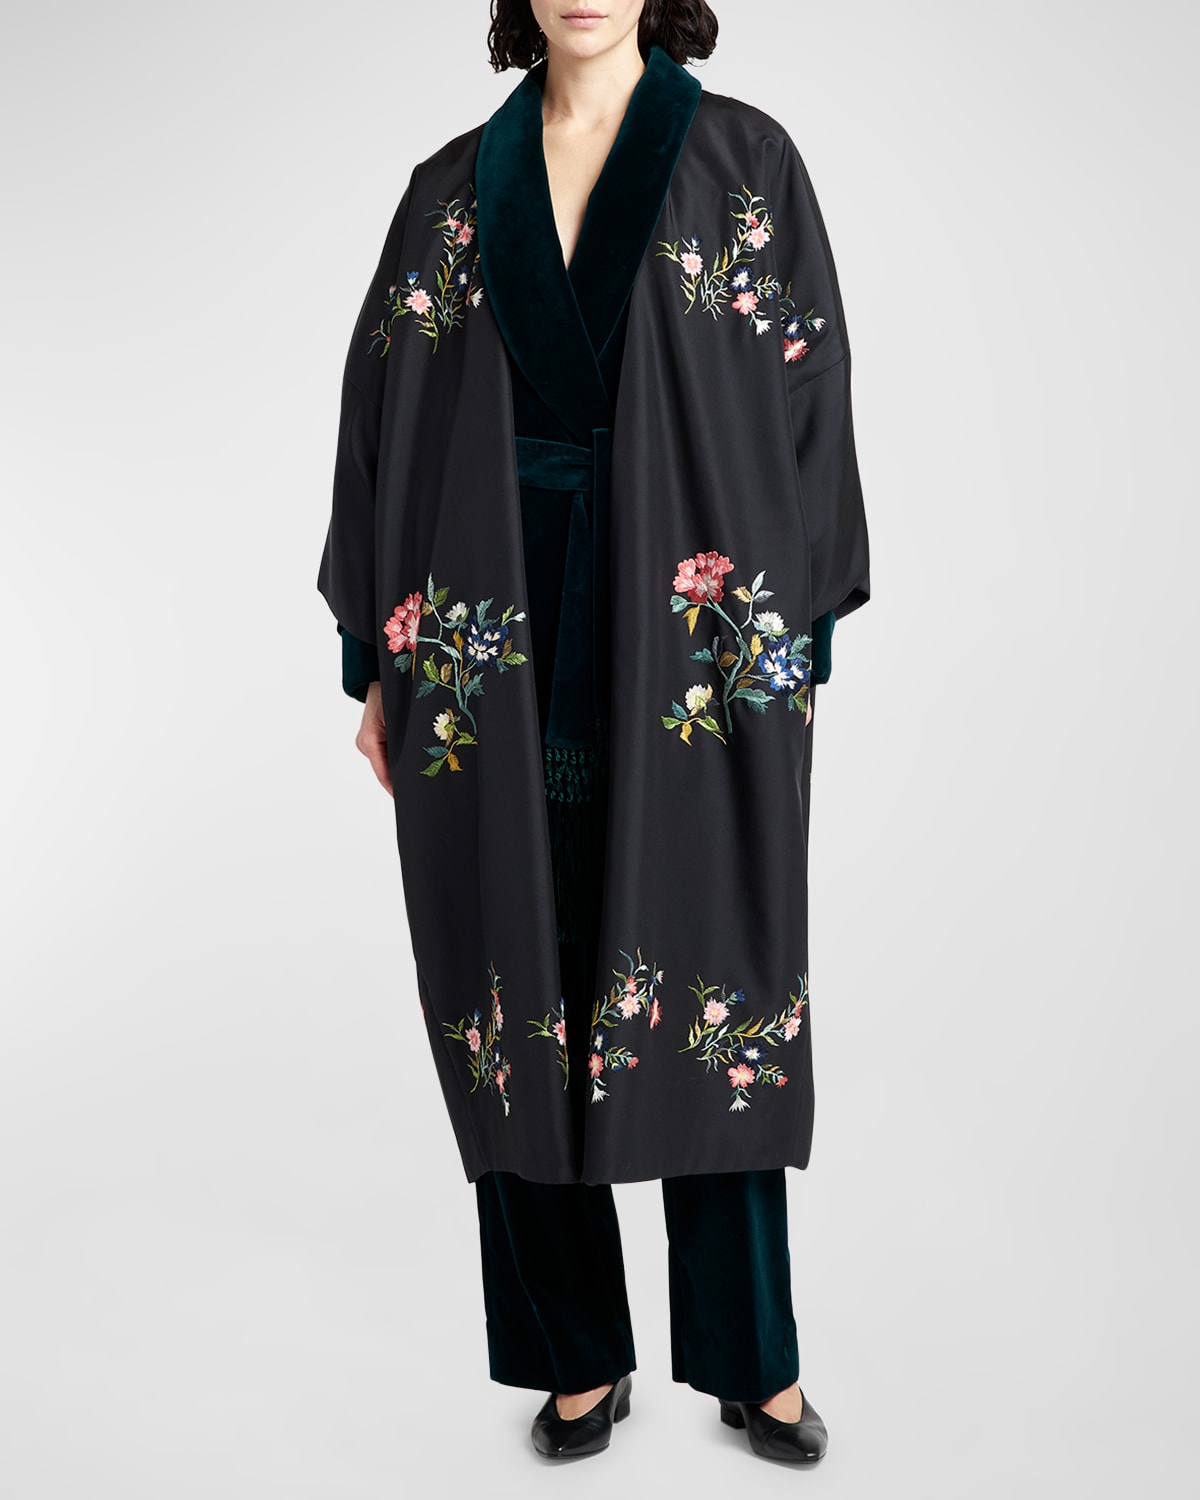 Capp Giulia Floral Embroidered Parachute Top Coat